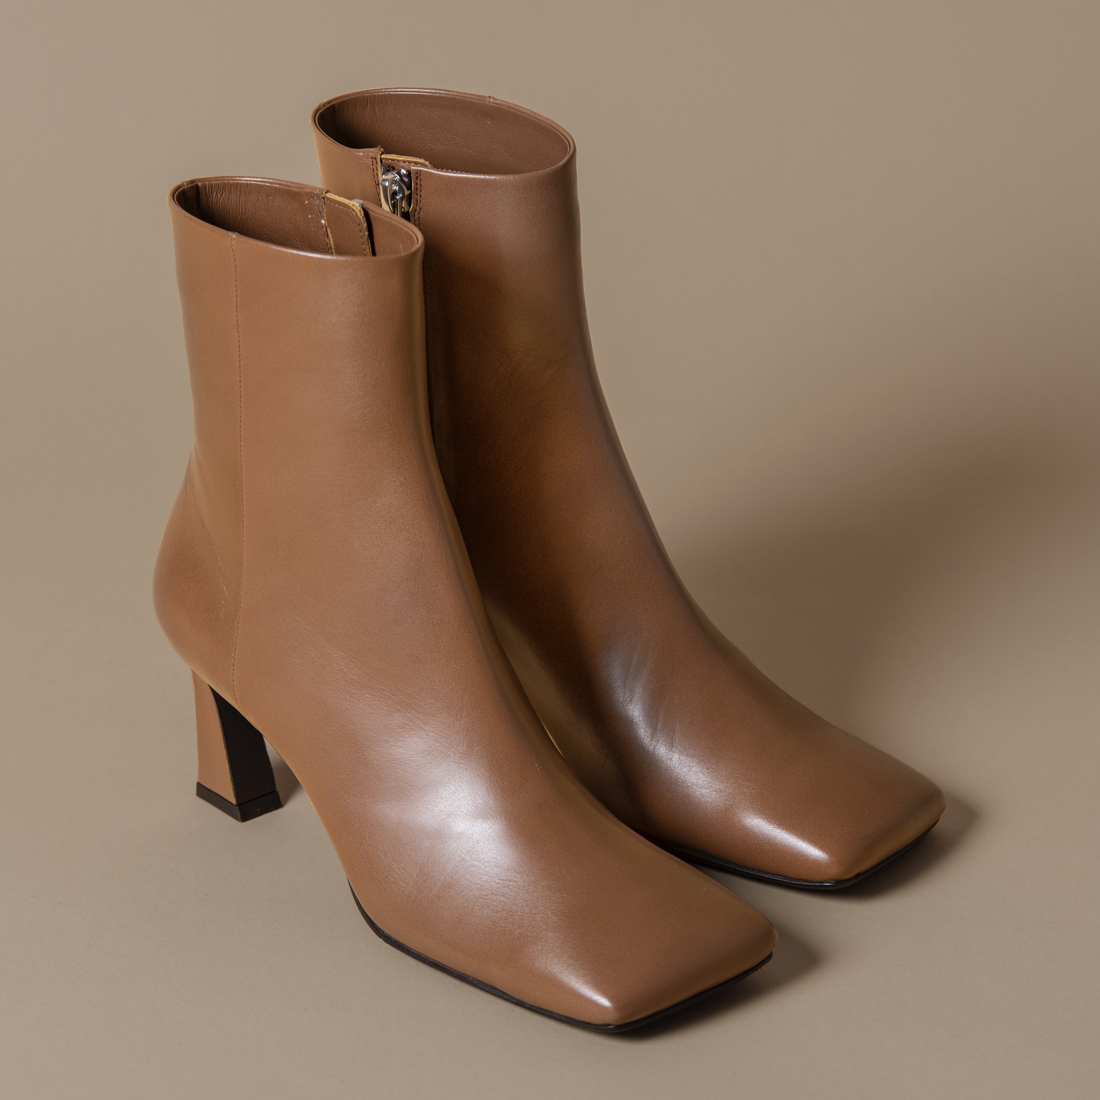 Square Toe Louis Heel Middle Boots - Limit till 2359